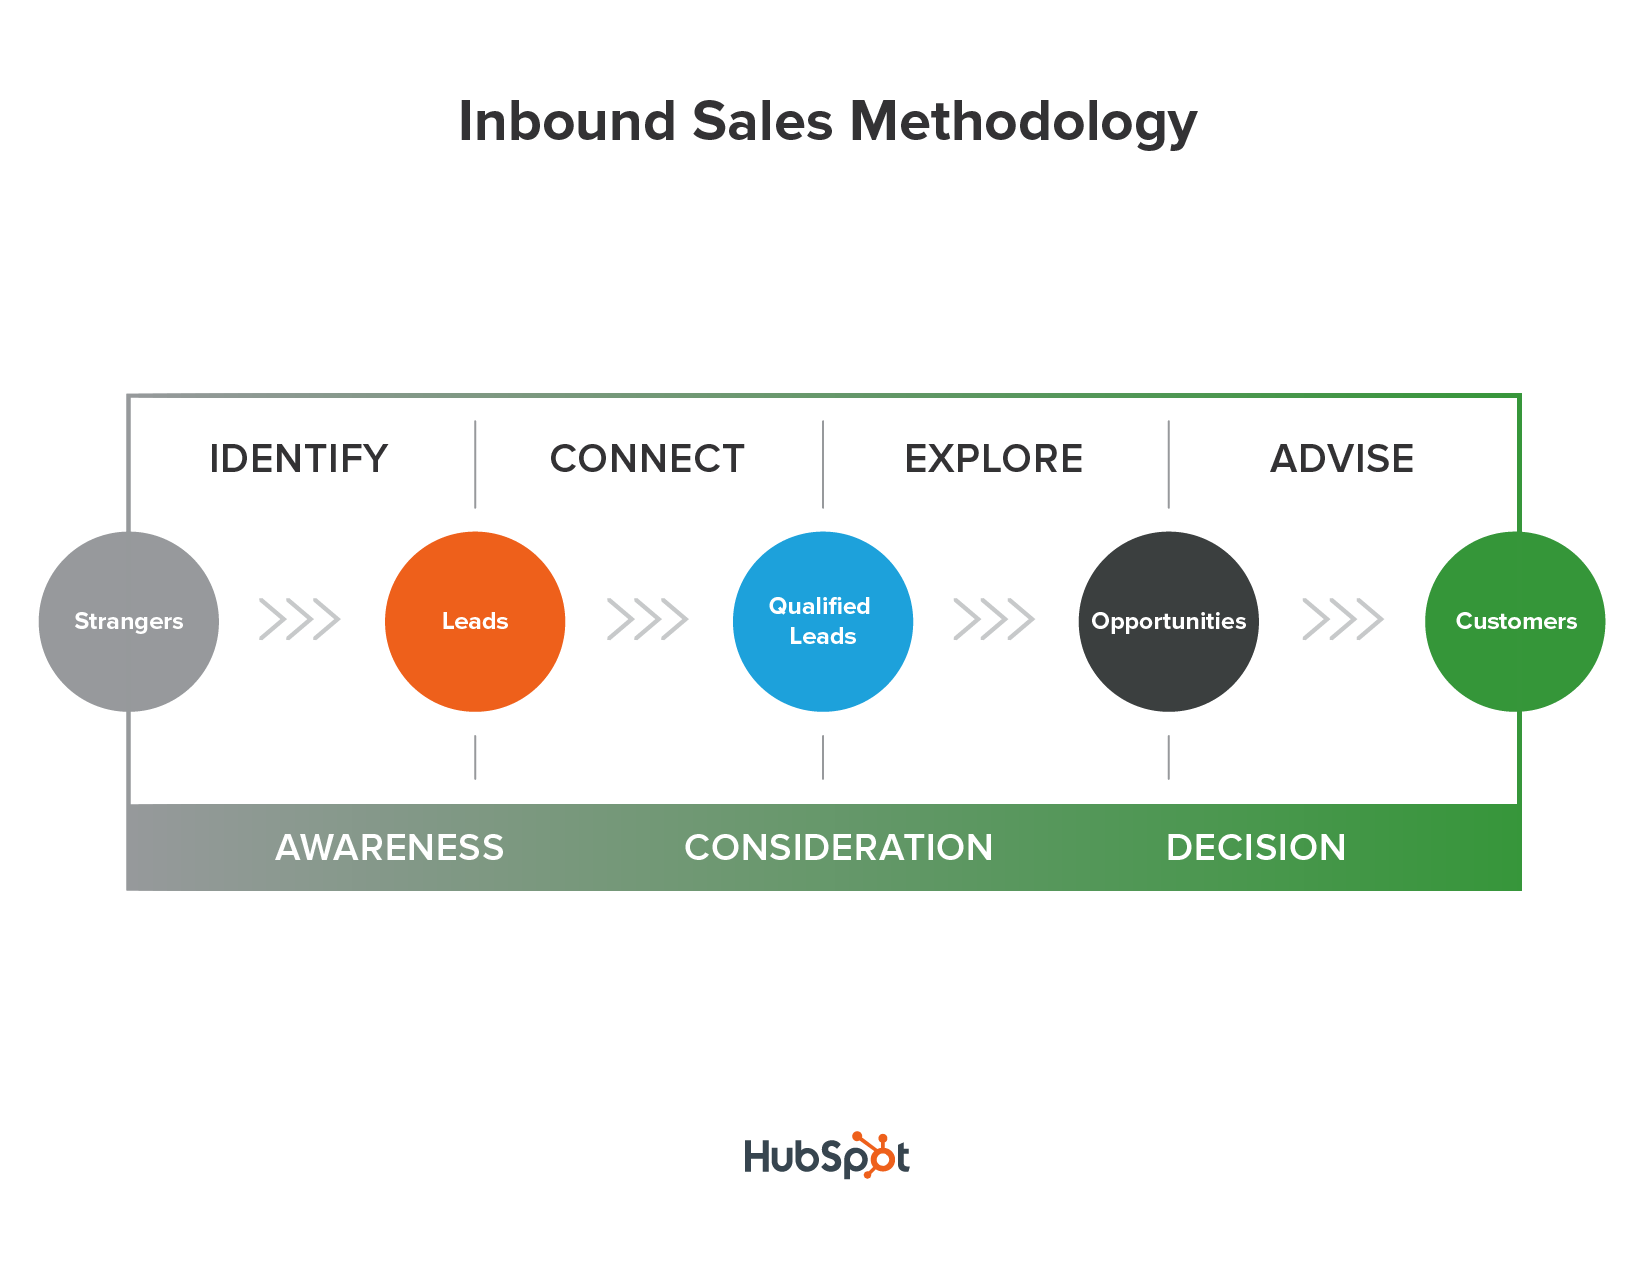 HubSpot’s Inbound Sales Methodology & Free Certification Course Usher in a New Era of Sales